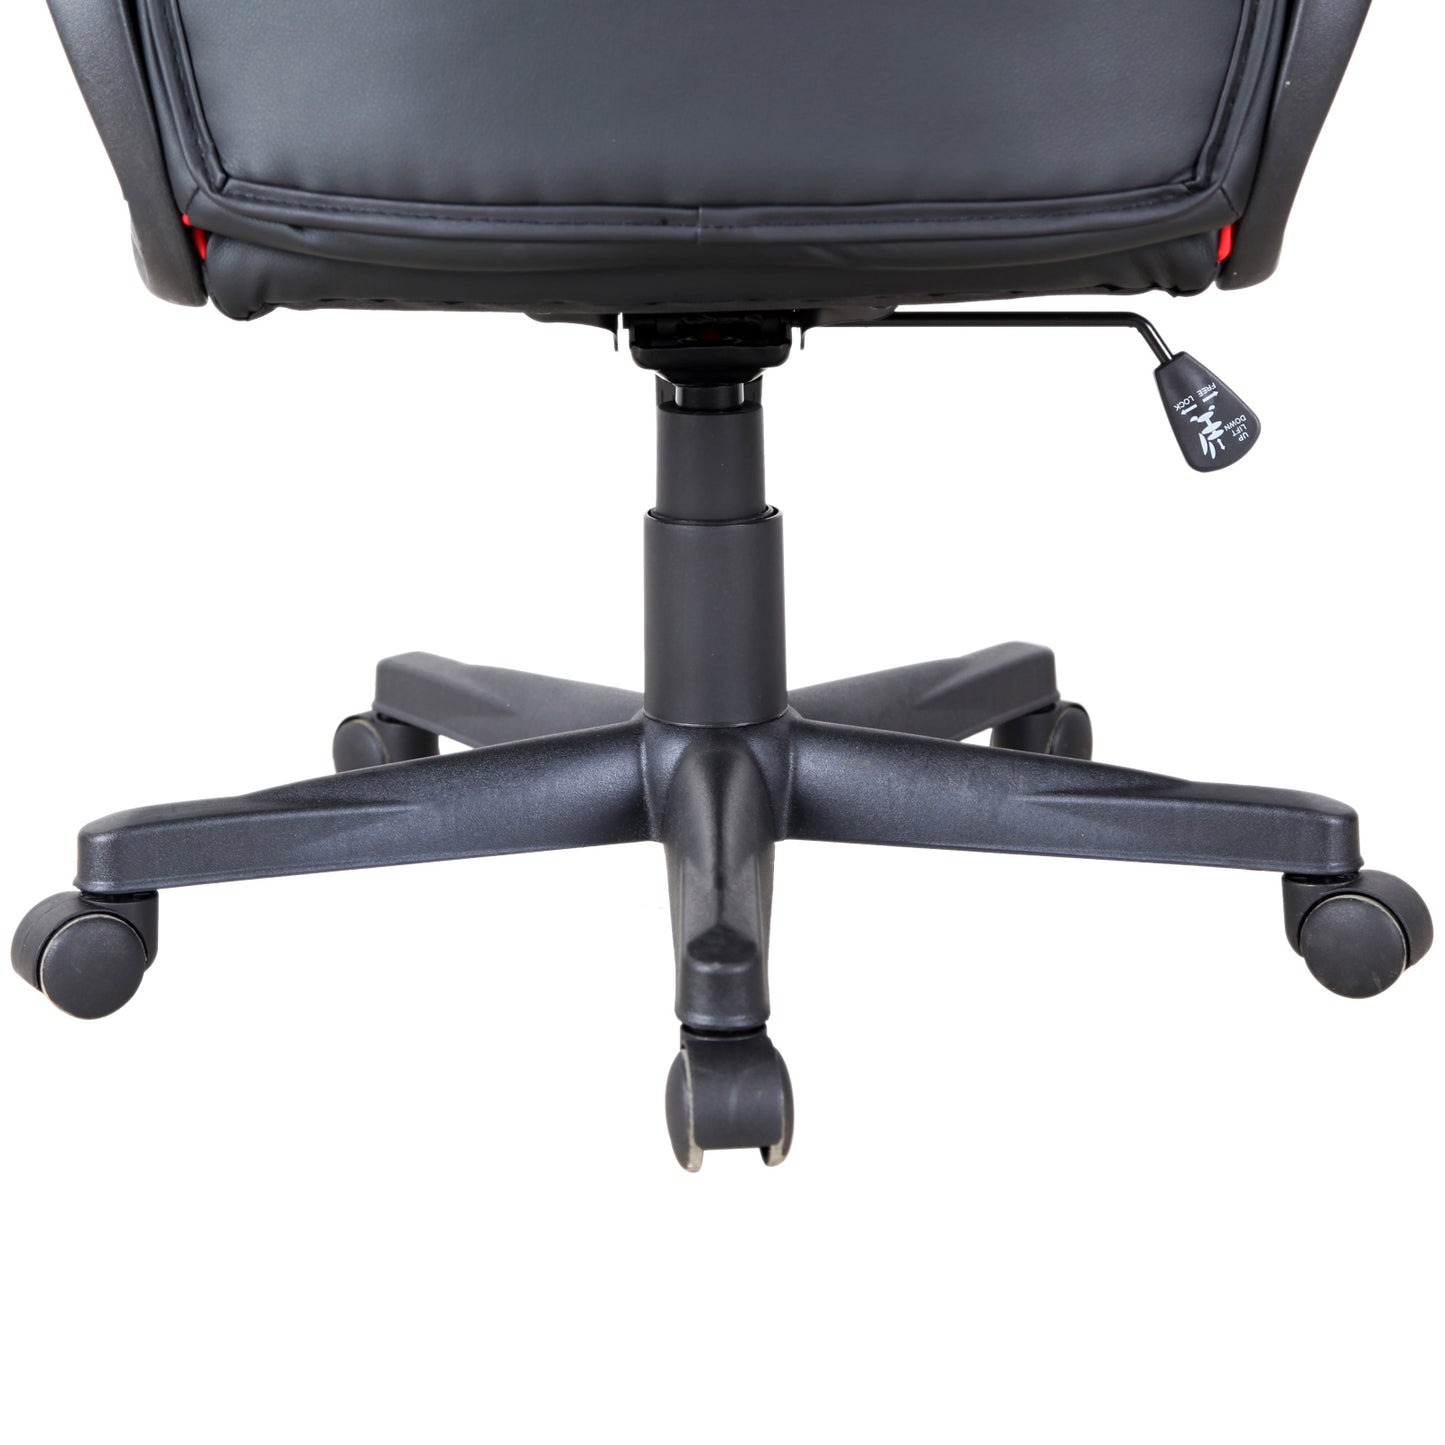 Vinsetto Executive PU Leather Office Gaming Chair Adjustable Height Padded Seat w/ Wheels Red